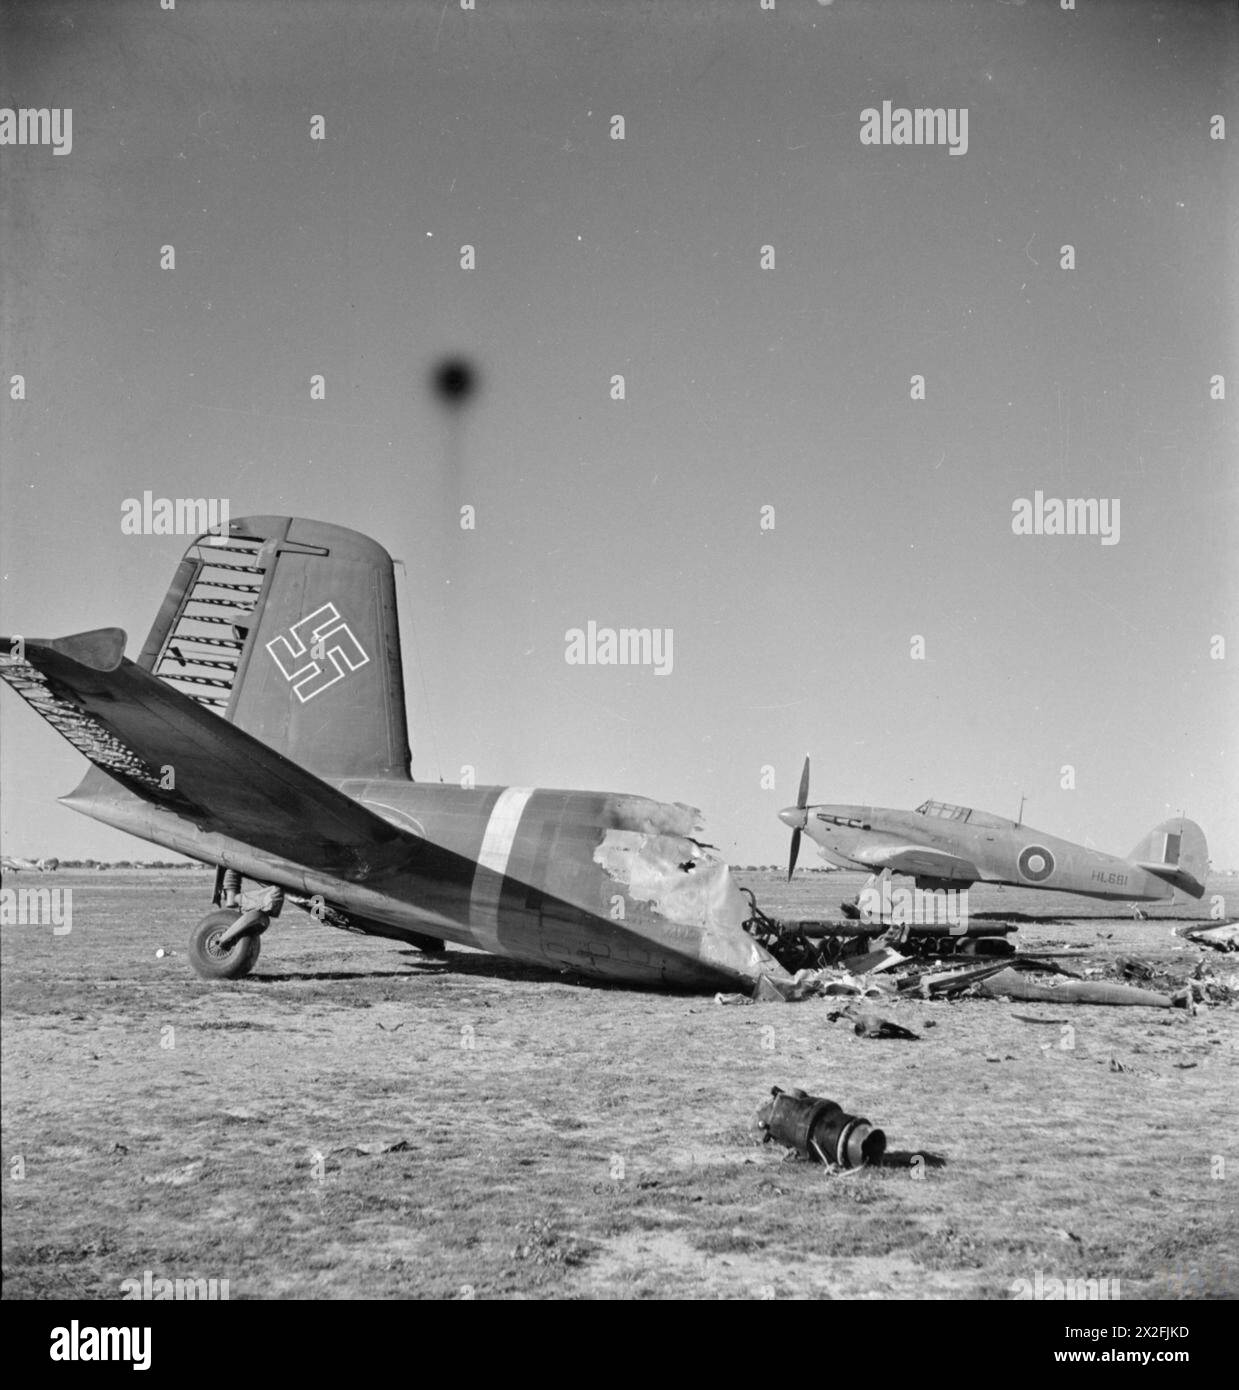 ROYAL AIR FORCE: OPERATIONS IN THE MIDDLE EAST AND NORTH AFRICA, 1939-1943. - Behind the wreckage of a burnt-out Focke Wulf FW 200 Condor, Hawker Hurricane Mark IIB, HL681 'A', of No. 274 Squadron RAF, stands on the landing ground at Castel Benito, Tripolitania, after its capture. 274 Squadron were temporarily installed there until the airfield at Mellaha could be made serviceable for use Royal Air Force, Maintenance Unit, 274 Stock Photo